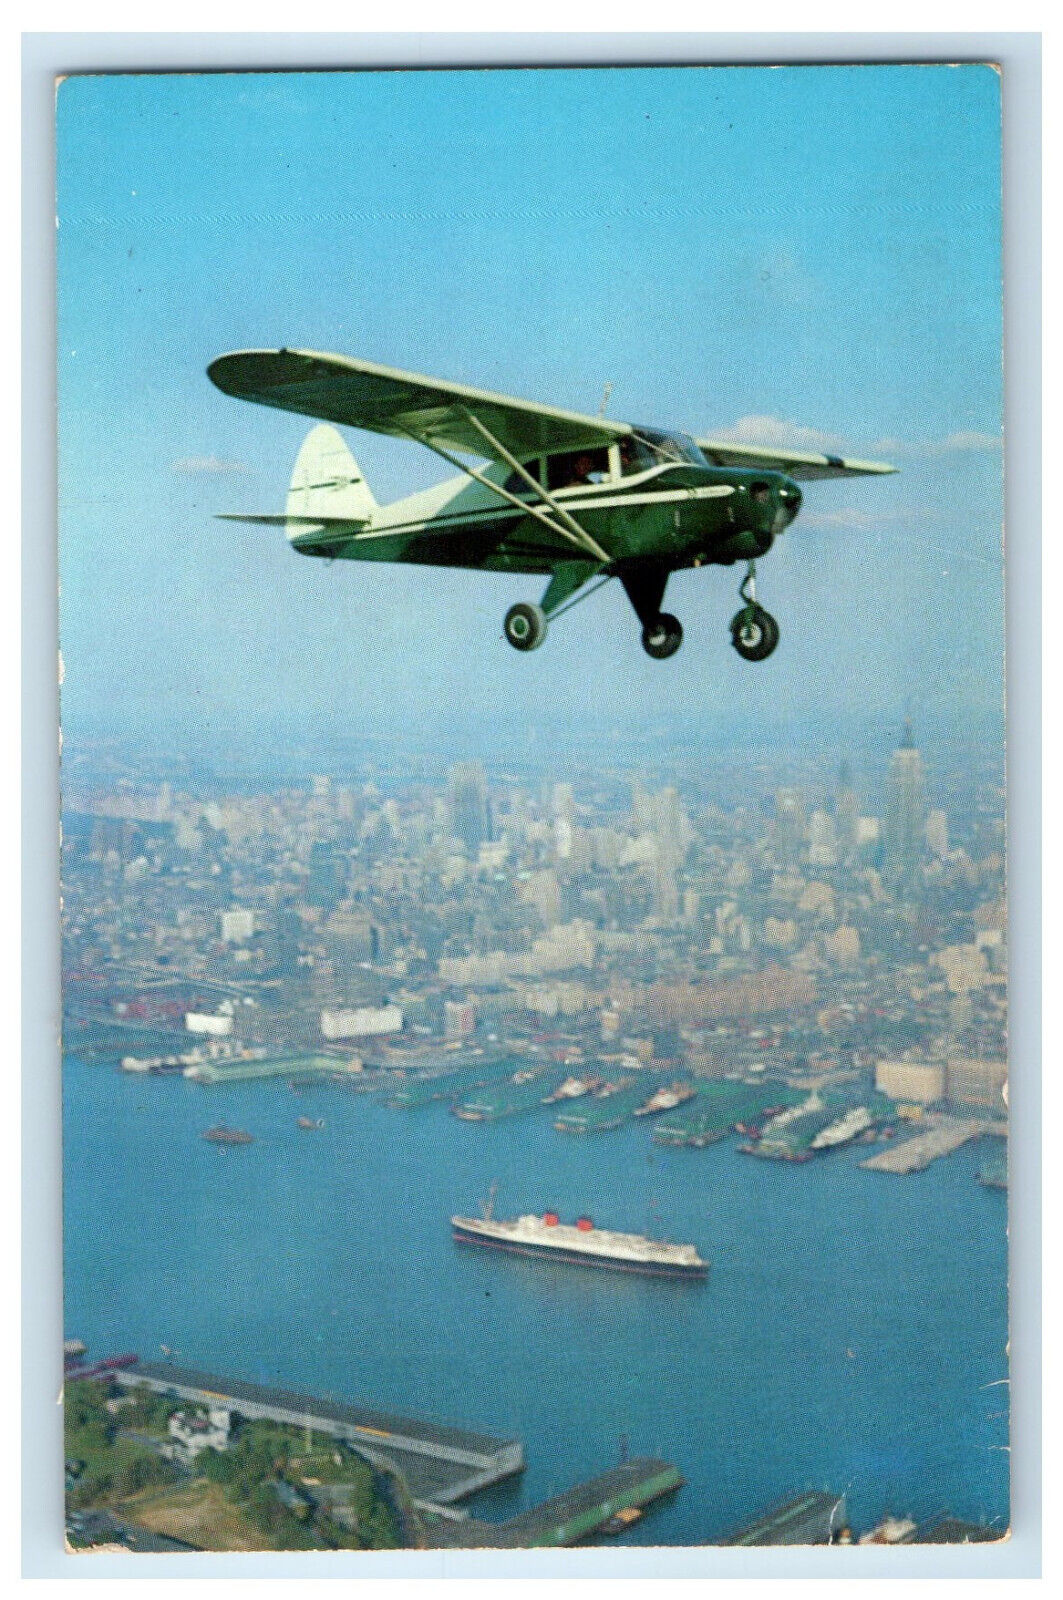 c1950s 4 Passenger Piper Tri Pacer Plane, You Go There Quickly By Piper Postcard